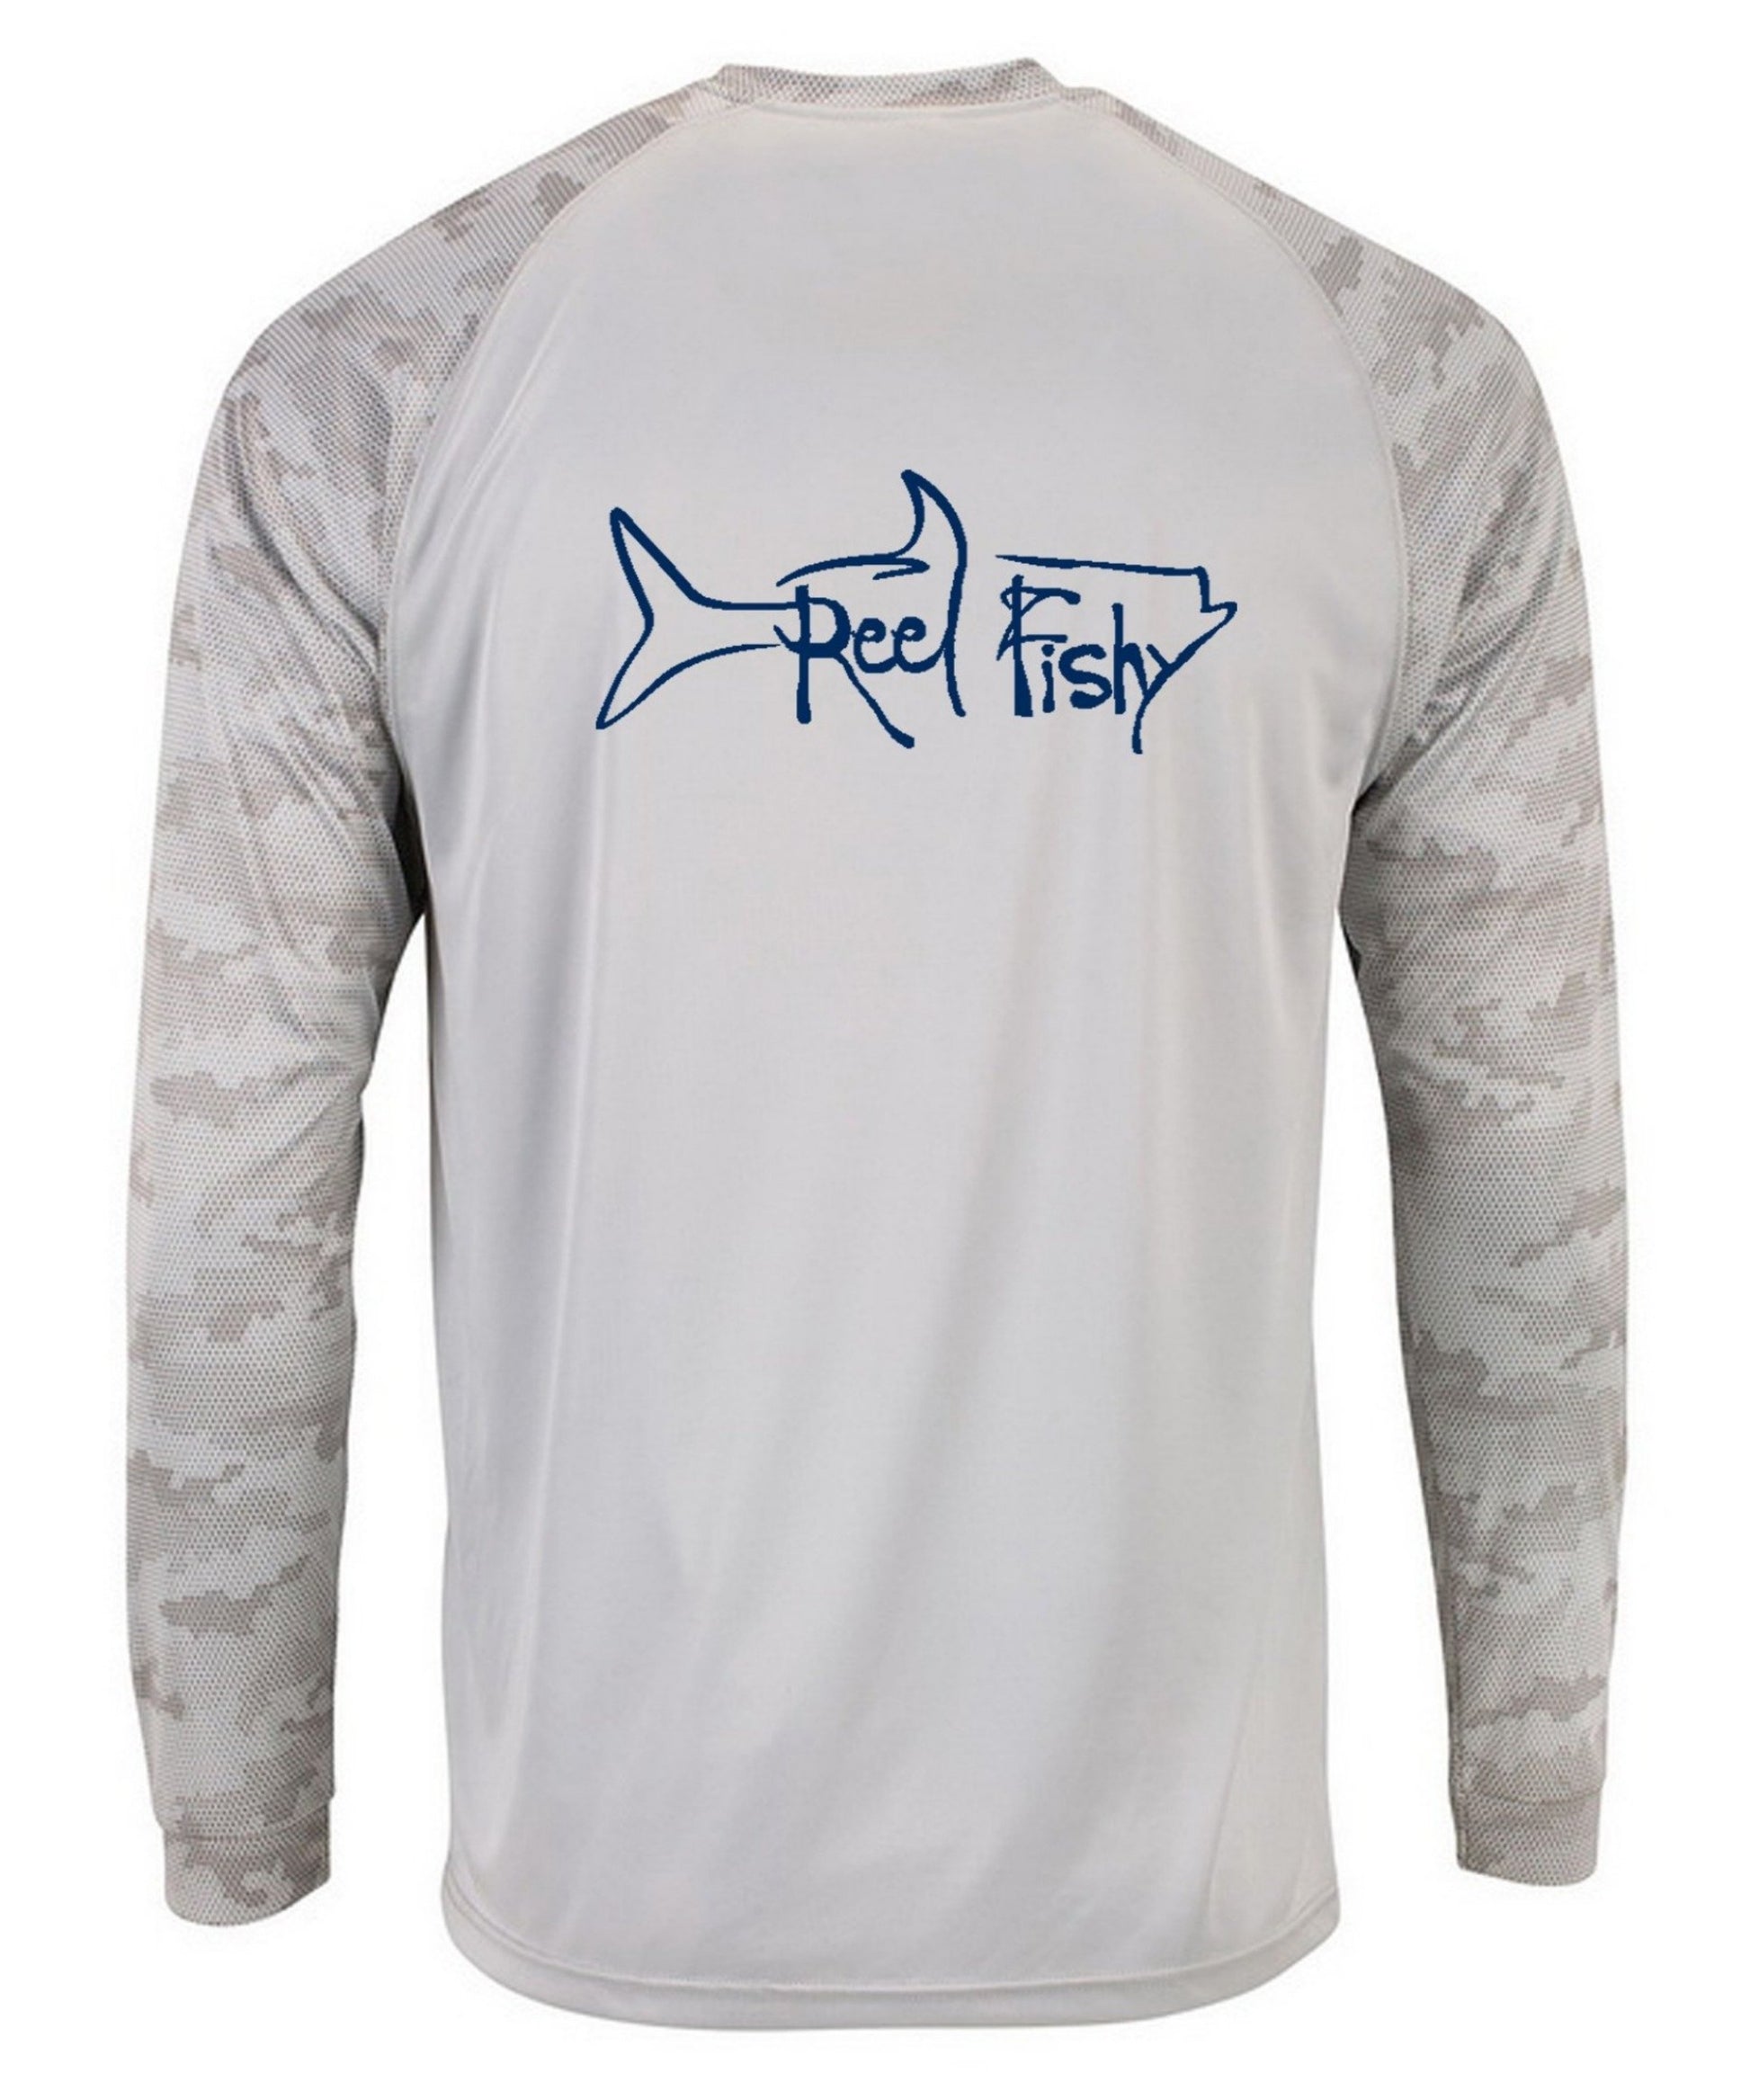 Youth Performance Dry-Fit Tarpon Fishing Shirts 50+Upf Sun Protection - Reel Fishy Apparel S / Pastel Blue S/S